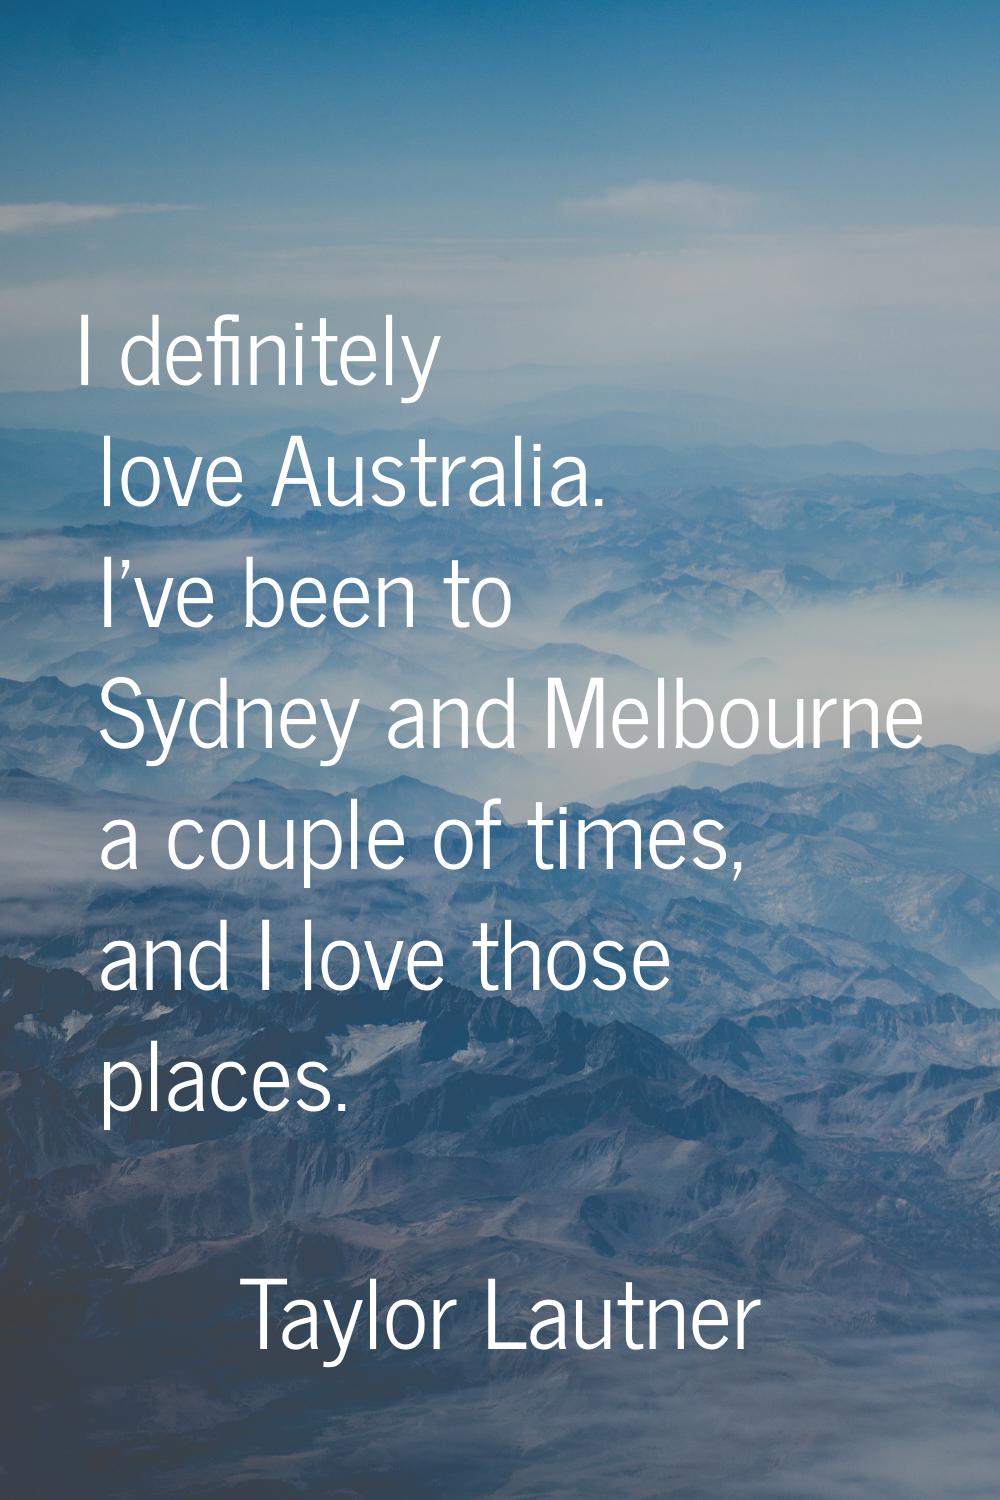 I definitely love Australia. I've been to Sydney and Melbourne a couple of times, and I love those 